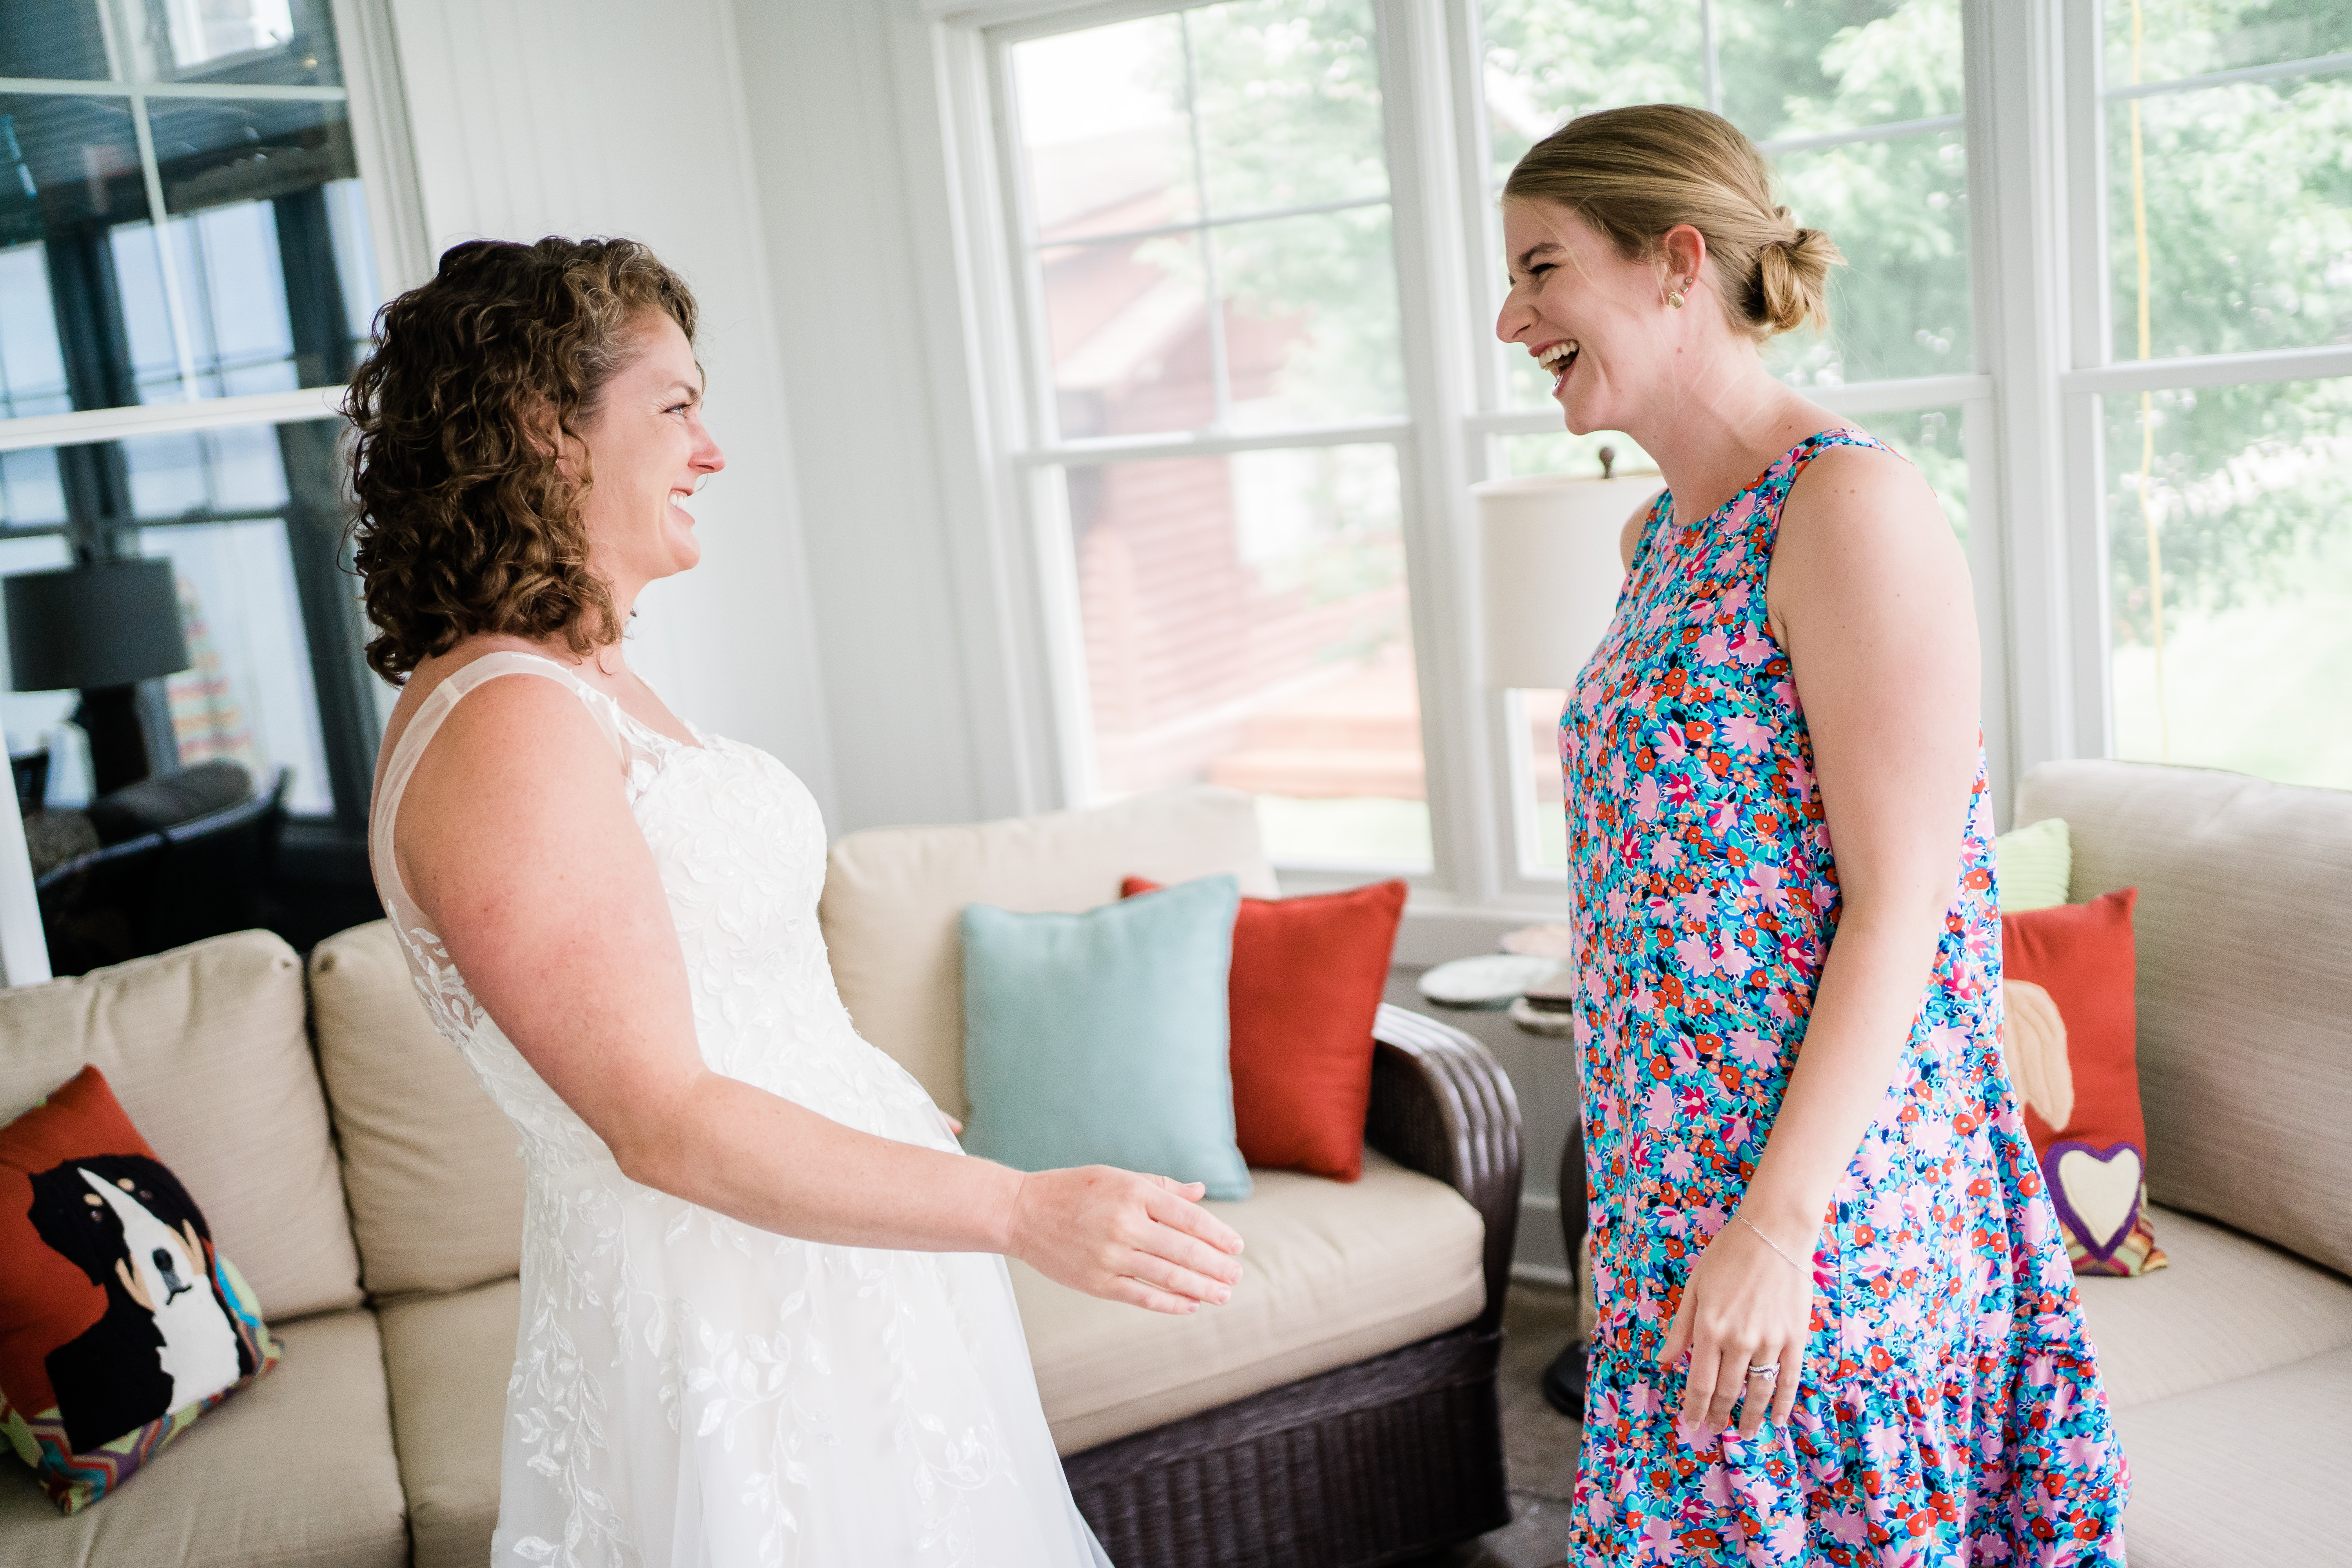 bride and friend shocked to see one another